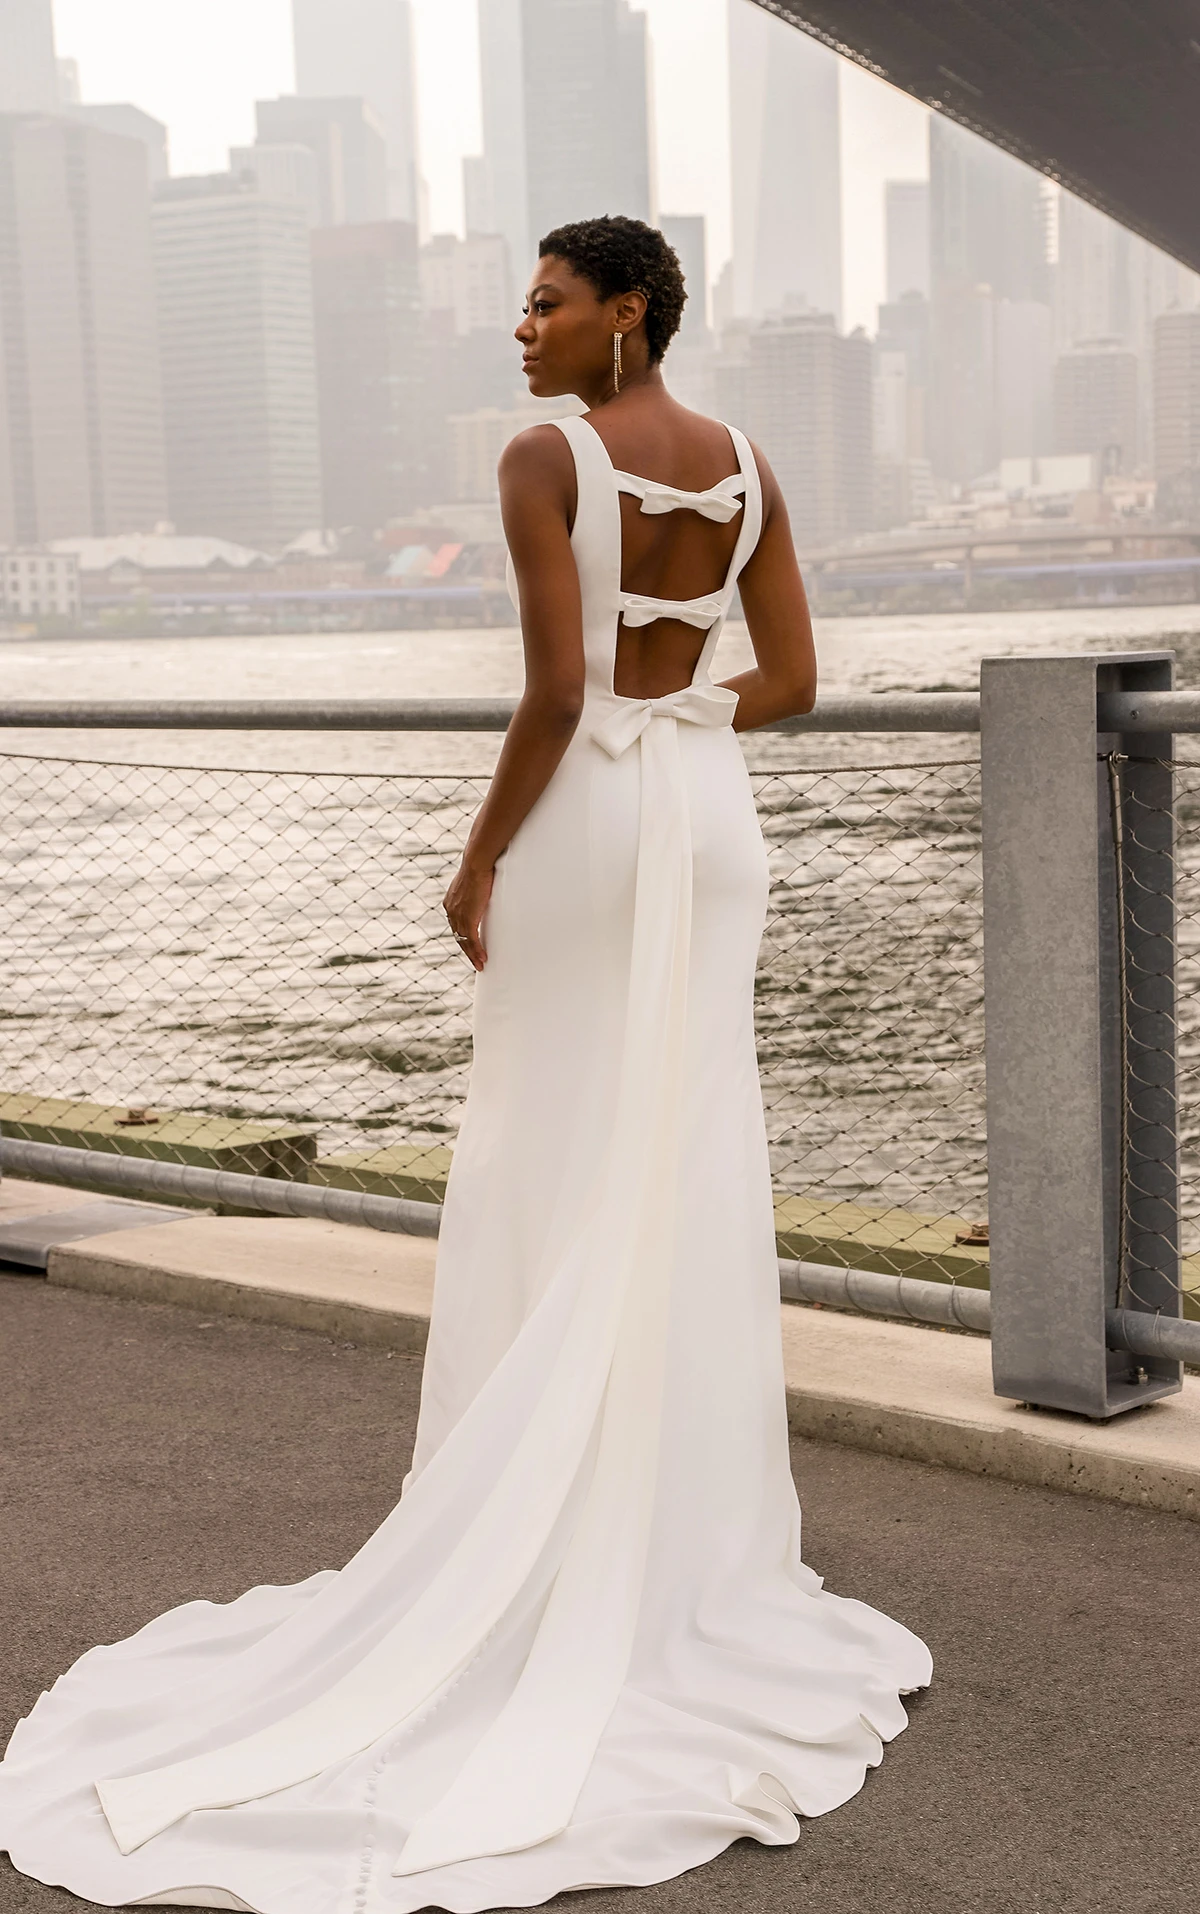 simple column wedding dress with high neck and strappy back with bows - D3901 by Essense of Australia